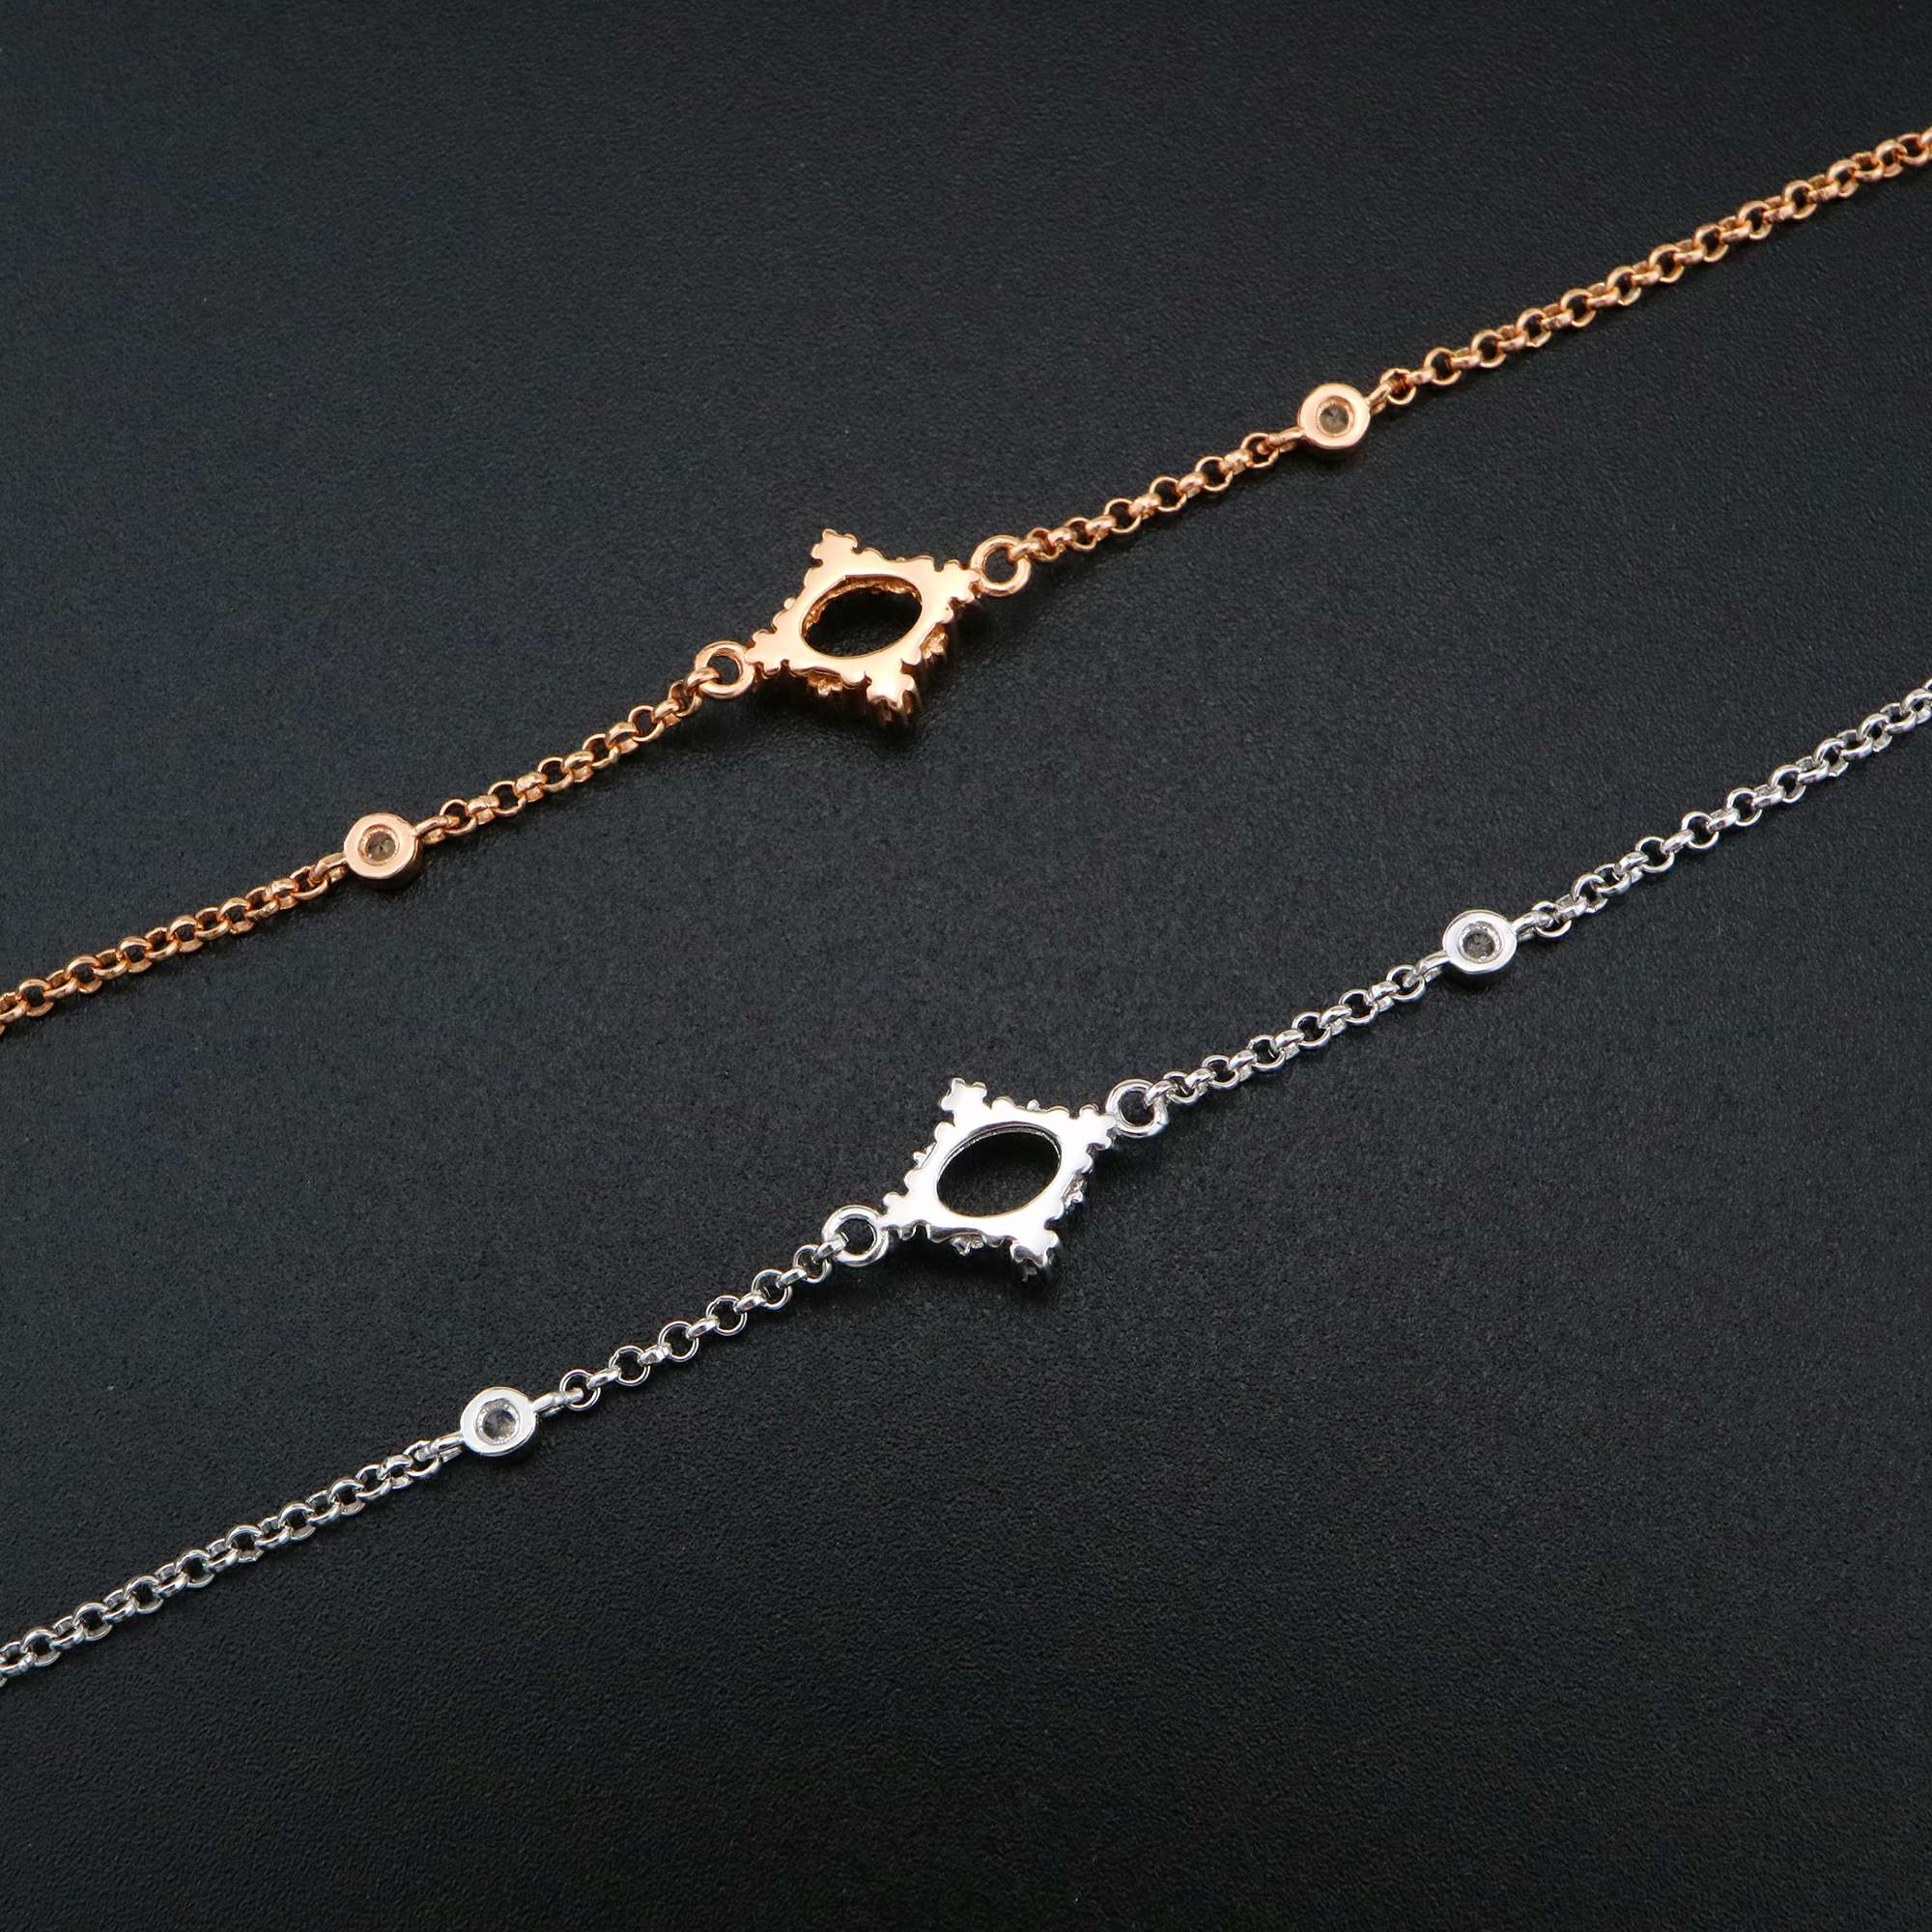 1Pcs 5x7MM Oval Prong Bezel Bracelet Settings Rose Gold Plated Solid 925 Sterling Silver Tray for Gemstone 6''+1.6'' 1900242 - Click Image to Close